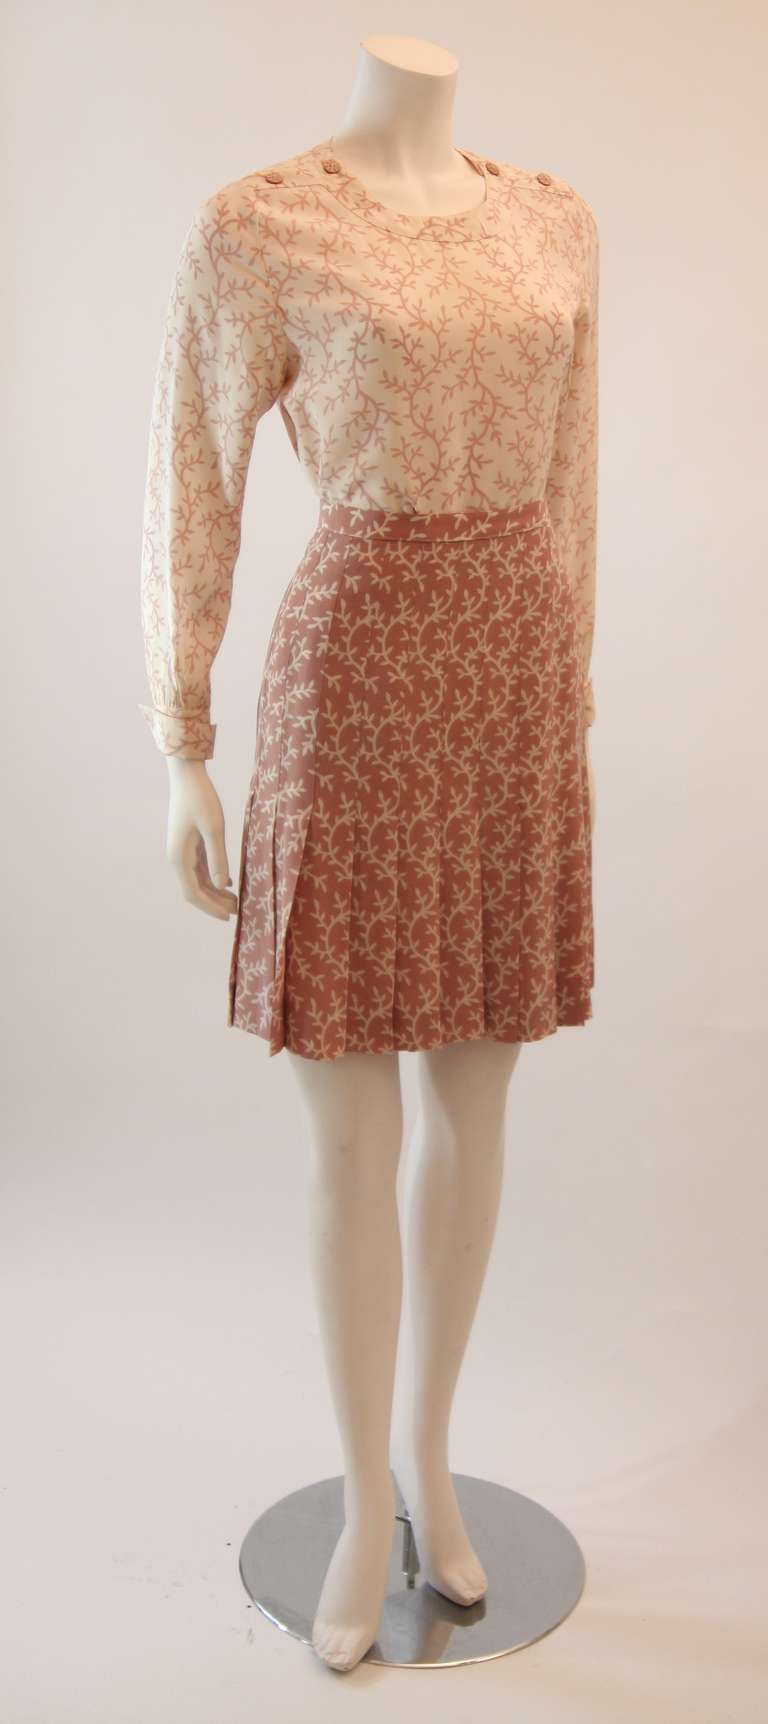 This is a charming Chanel skirt set. The set is a beautiful hue of mauve pink, it comes with three pieces, a jacket, a blouse, and a wonderfully pleated skirt. The Jacket features a five button closure  and two front pockets. The skirt falls